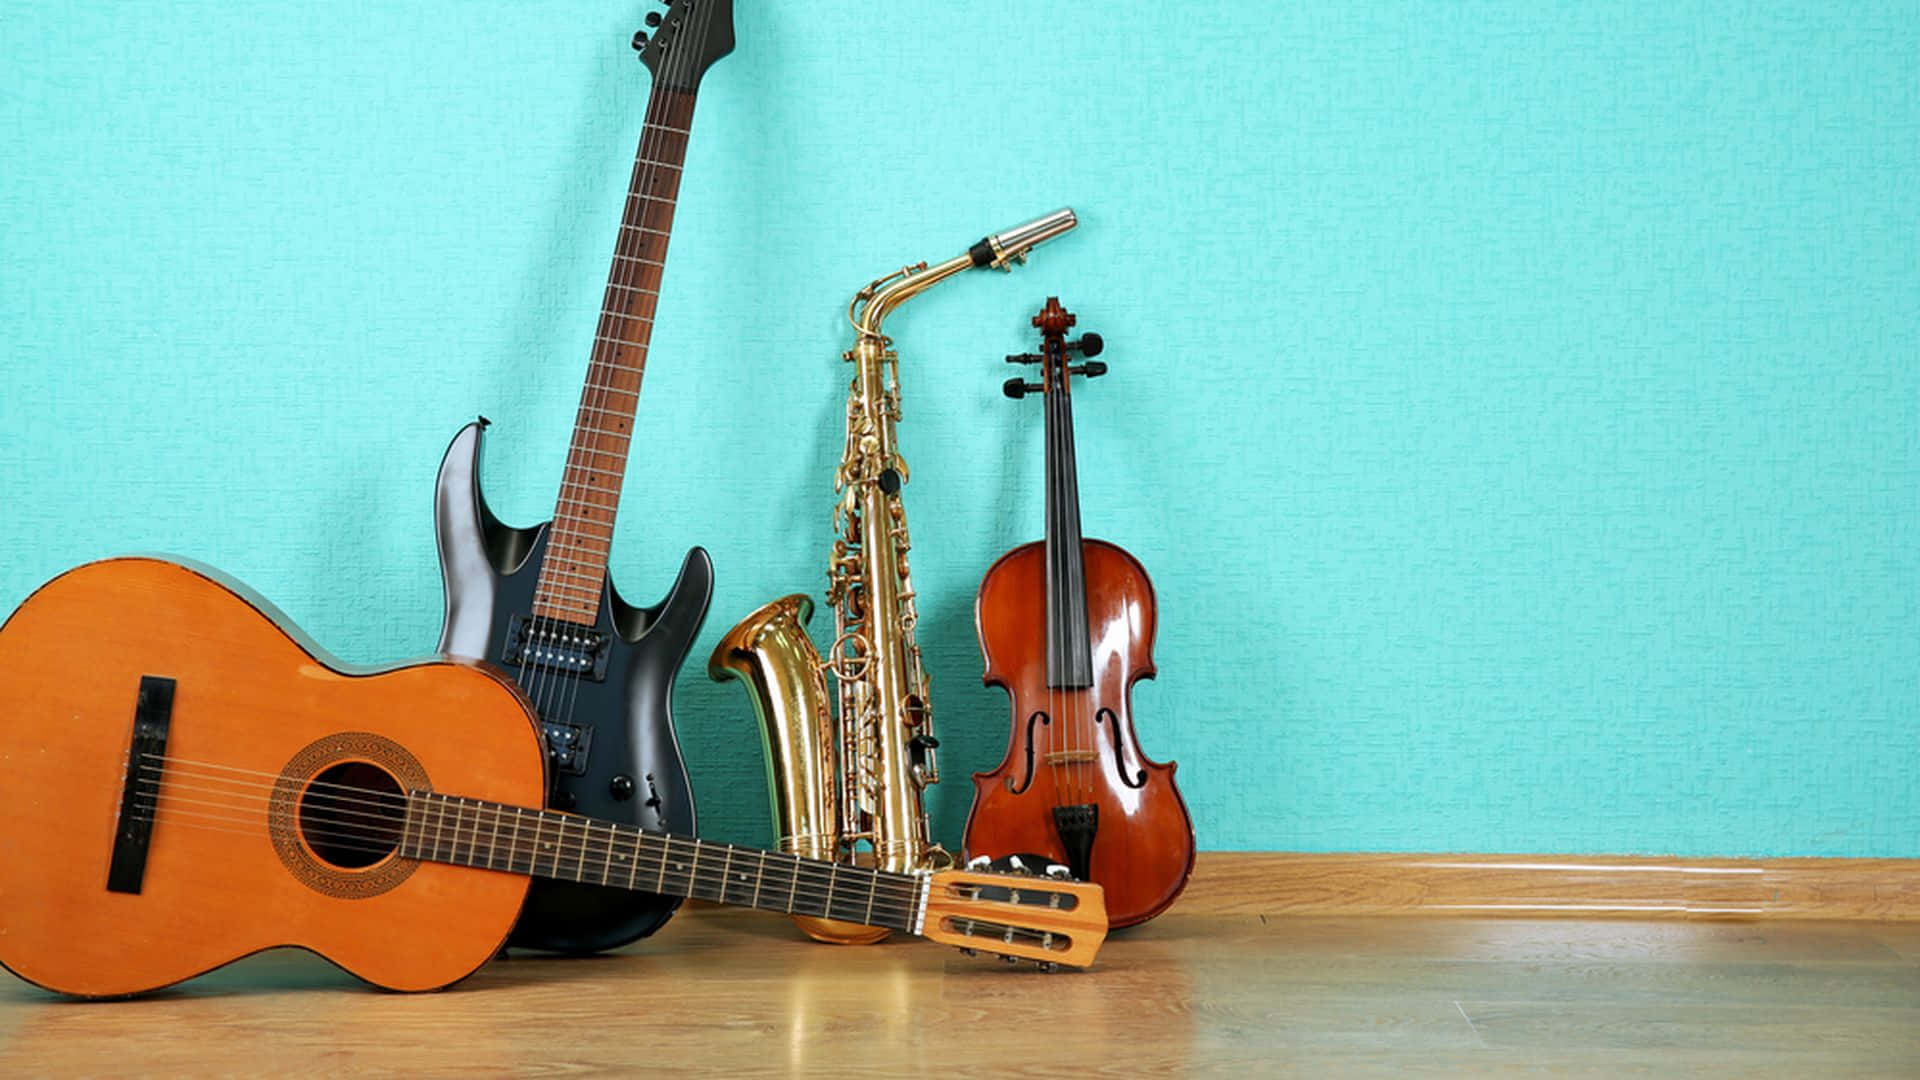 Four Musical Instruments Leaning On Wall Picture